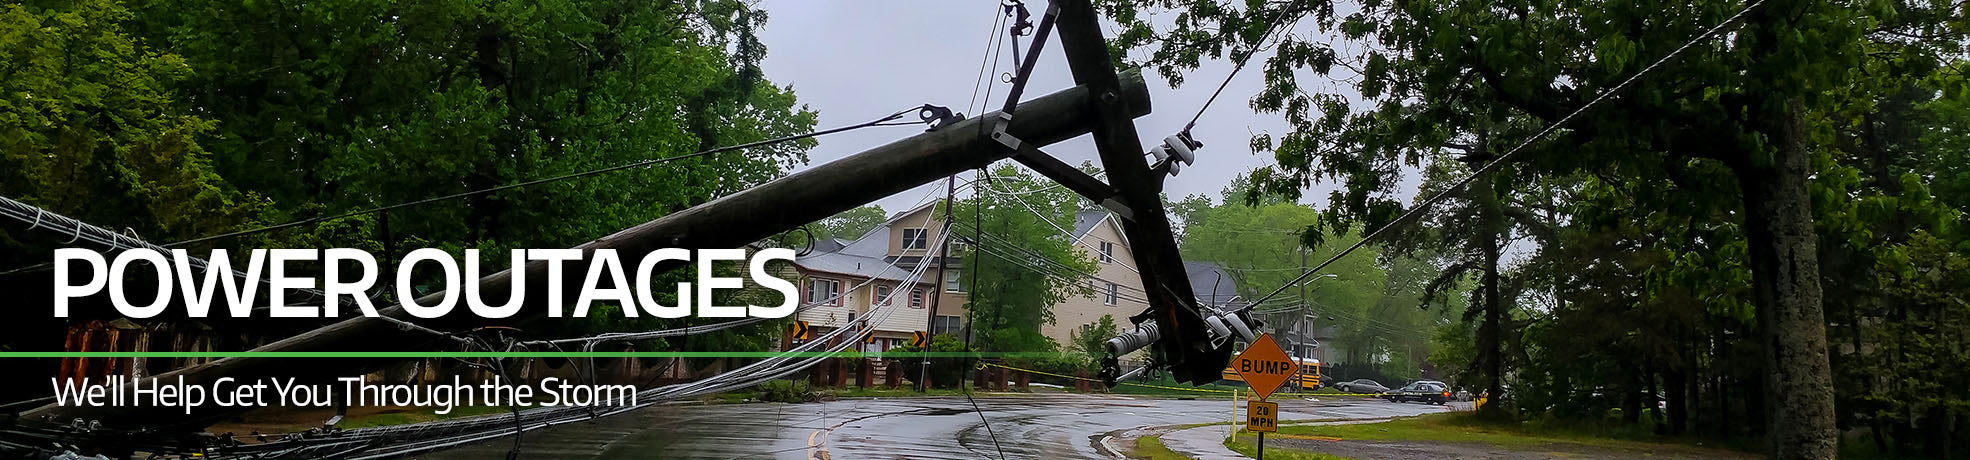 Power Outages and Emergencies | LitezAll